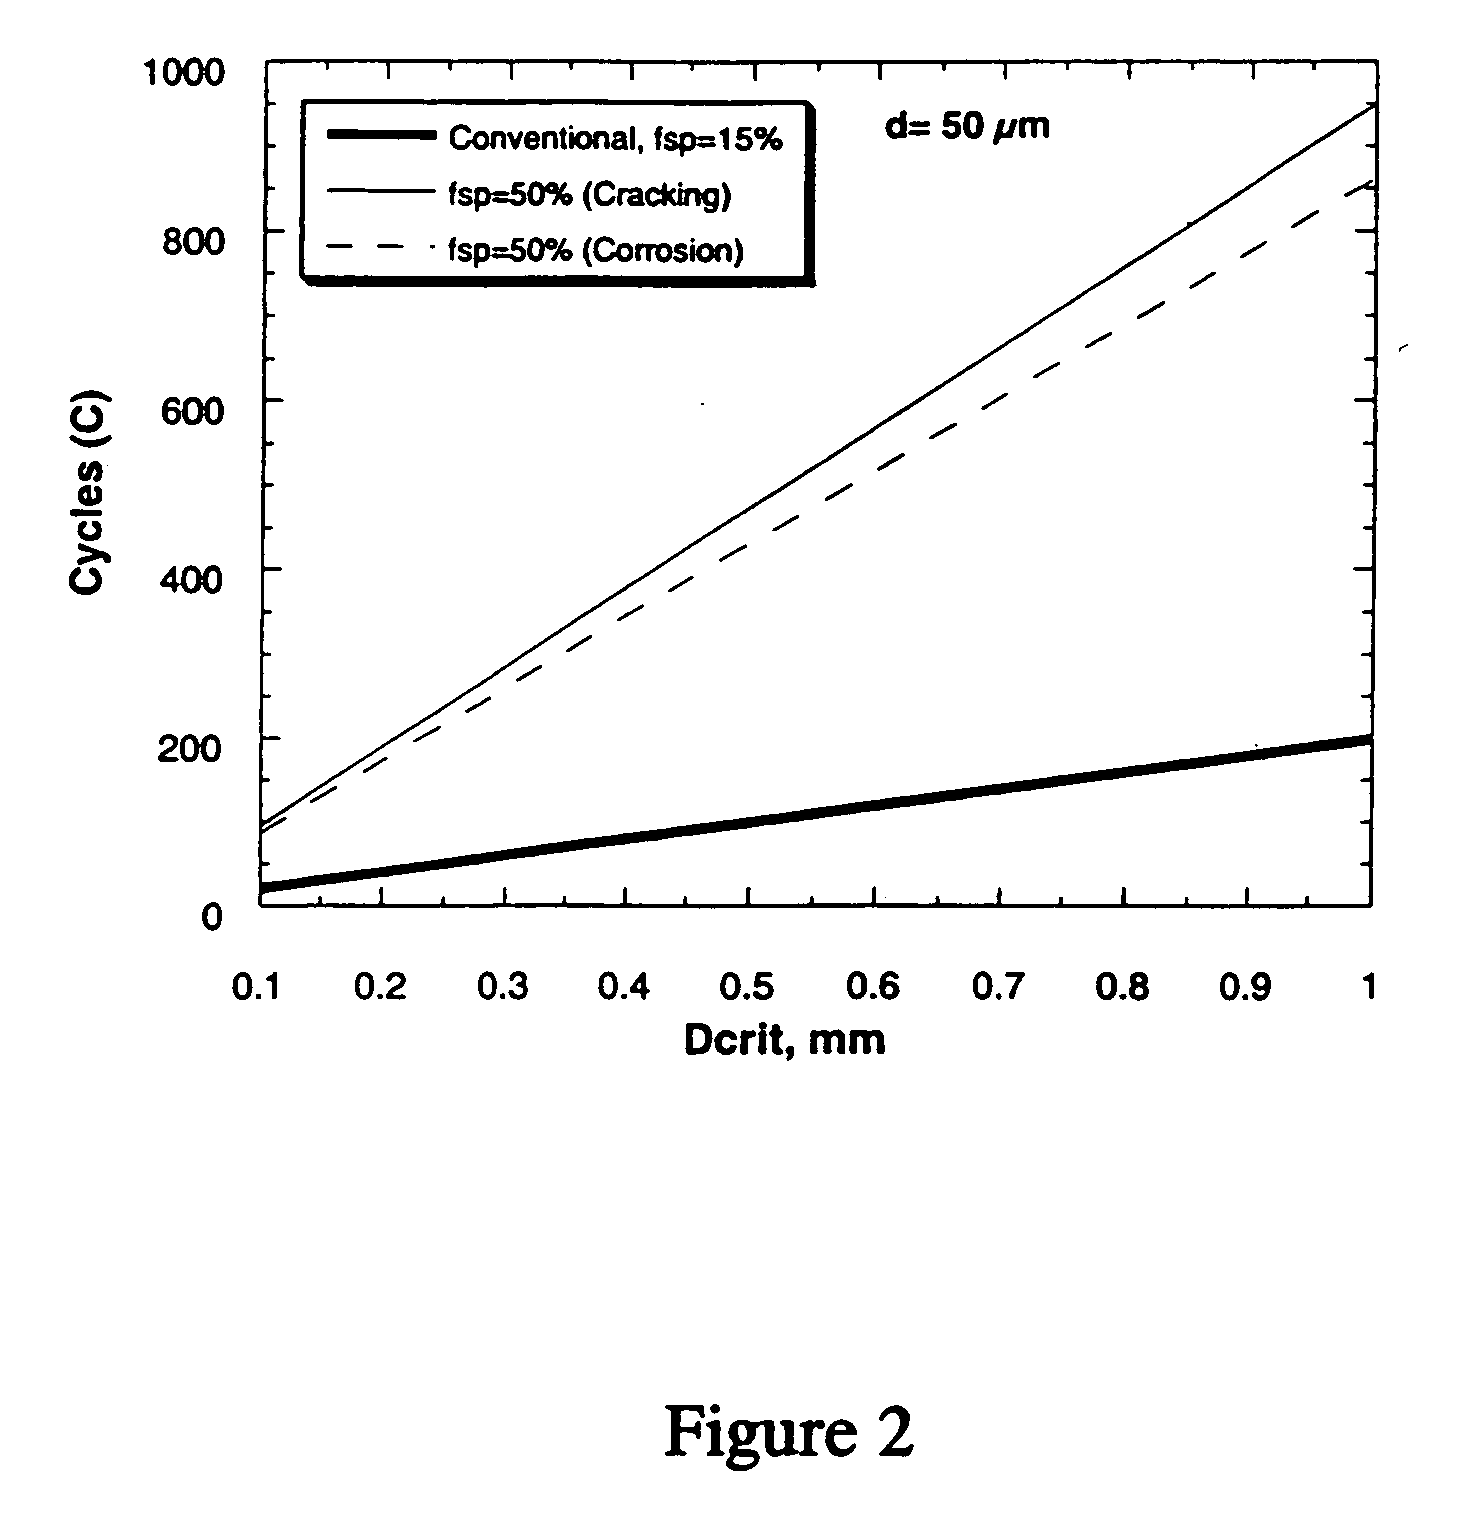 Thermo-mechanical treated lead and lead alloys especially for current collectors and connectors in lead-acid batteries